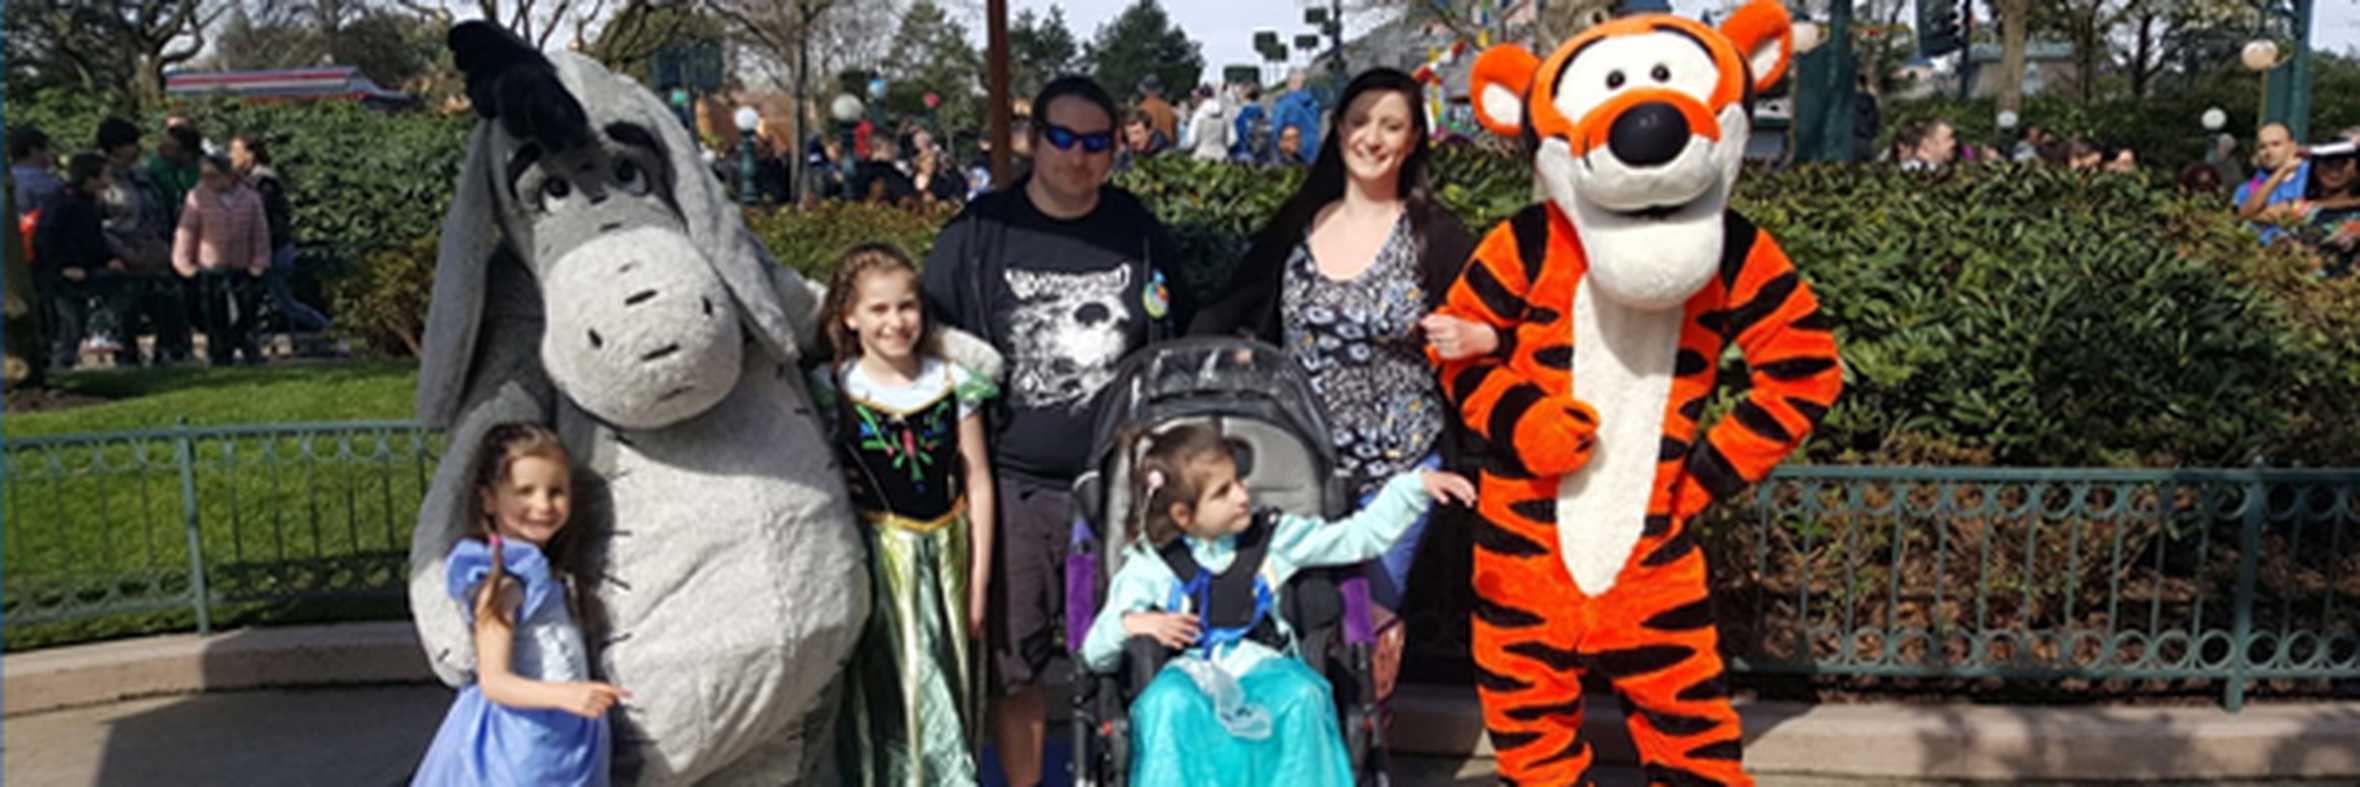 Connie and her family with Tigger and Eeyore